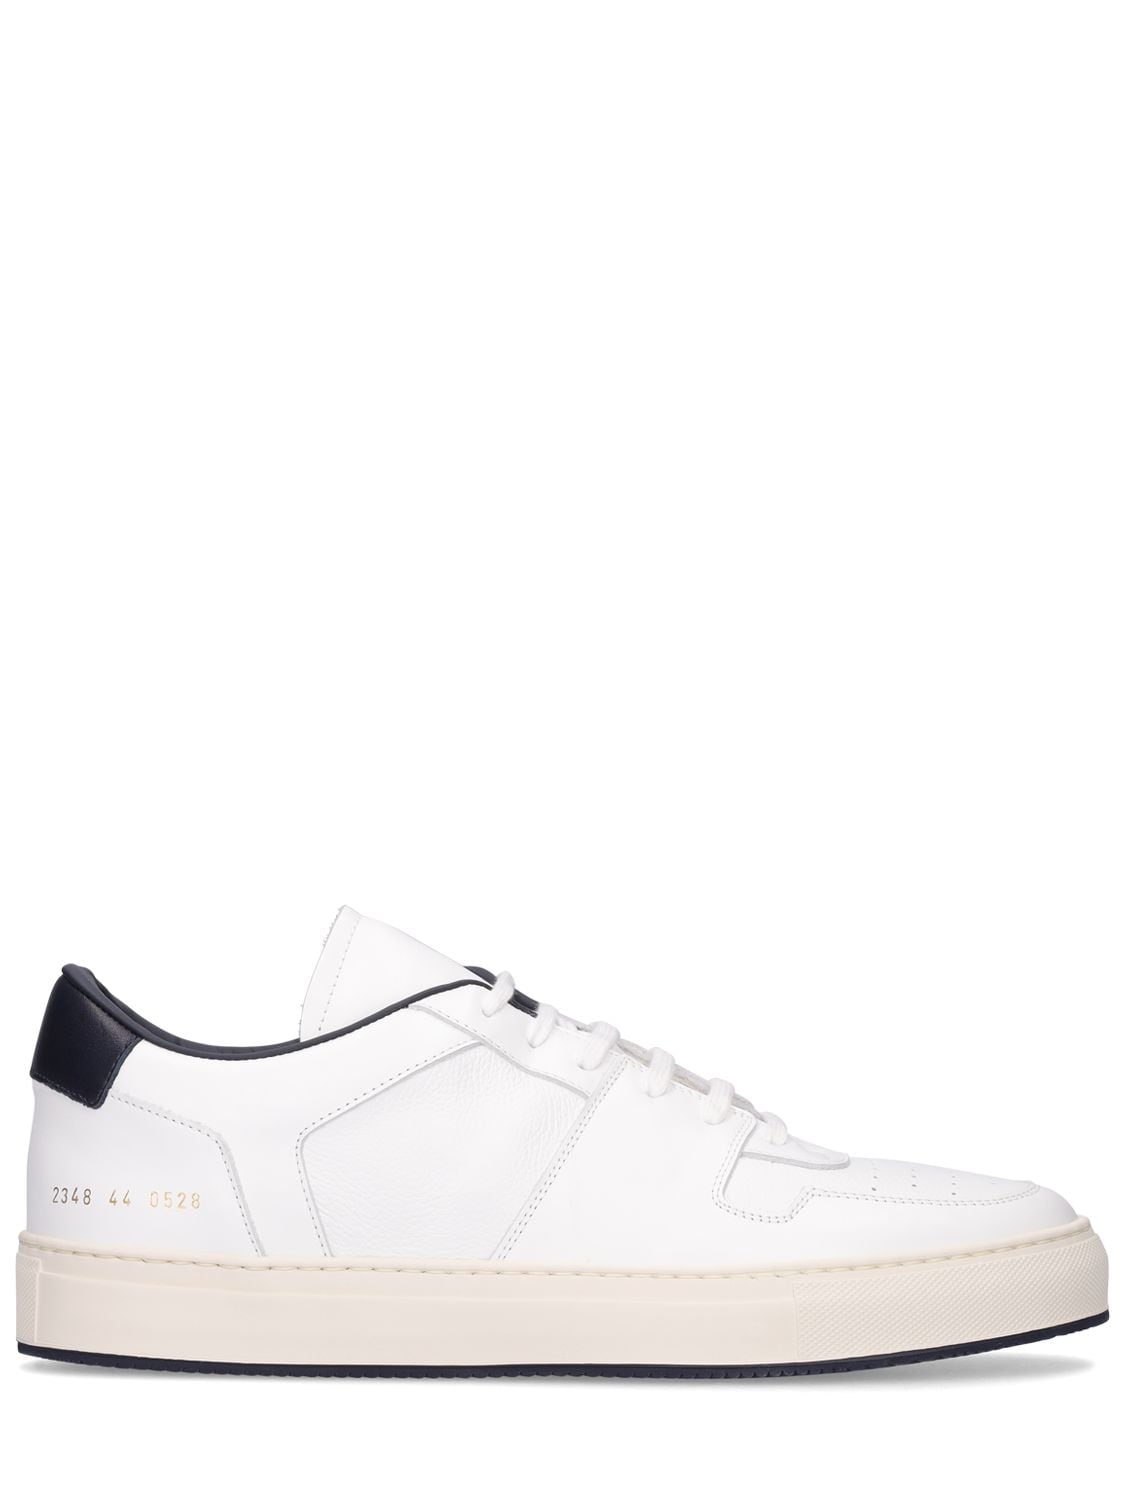 COMMON PROJECTS Decades Low Leather Sneakers